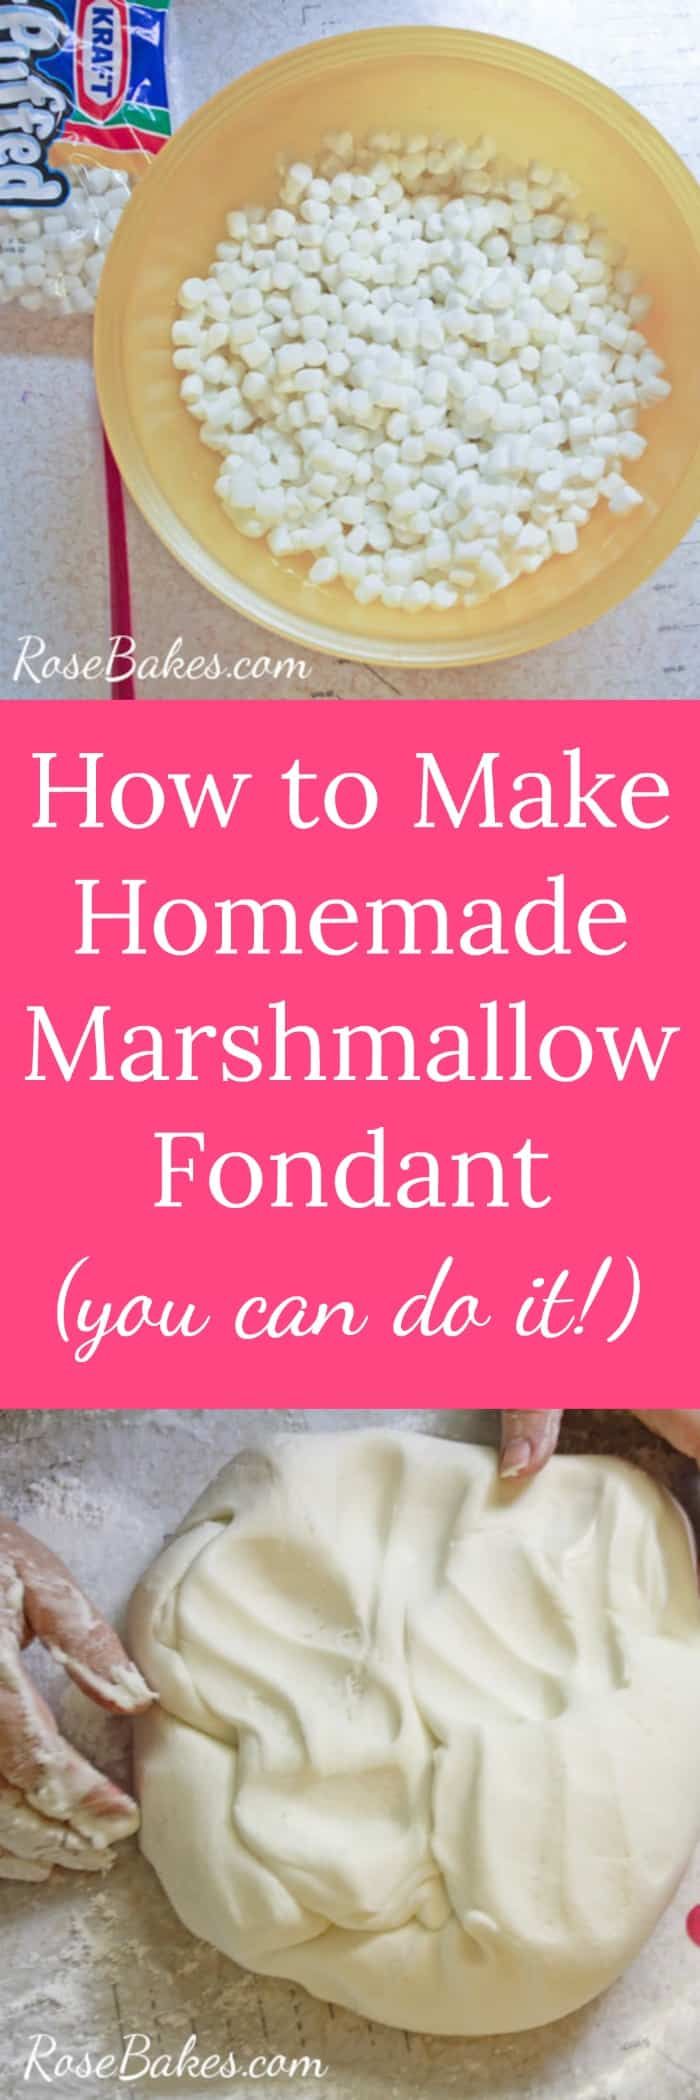 how to make homemade marshmallow fondant you can do it with only one ingredient